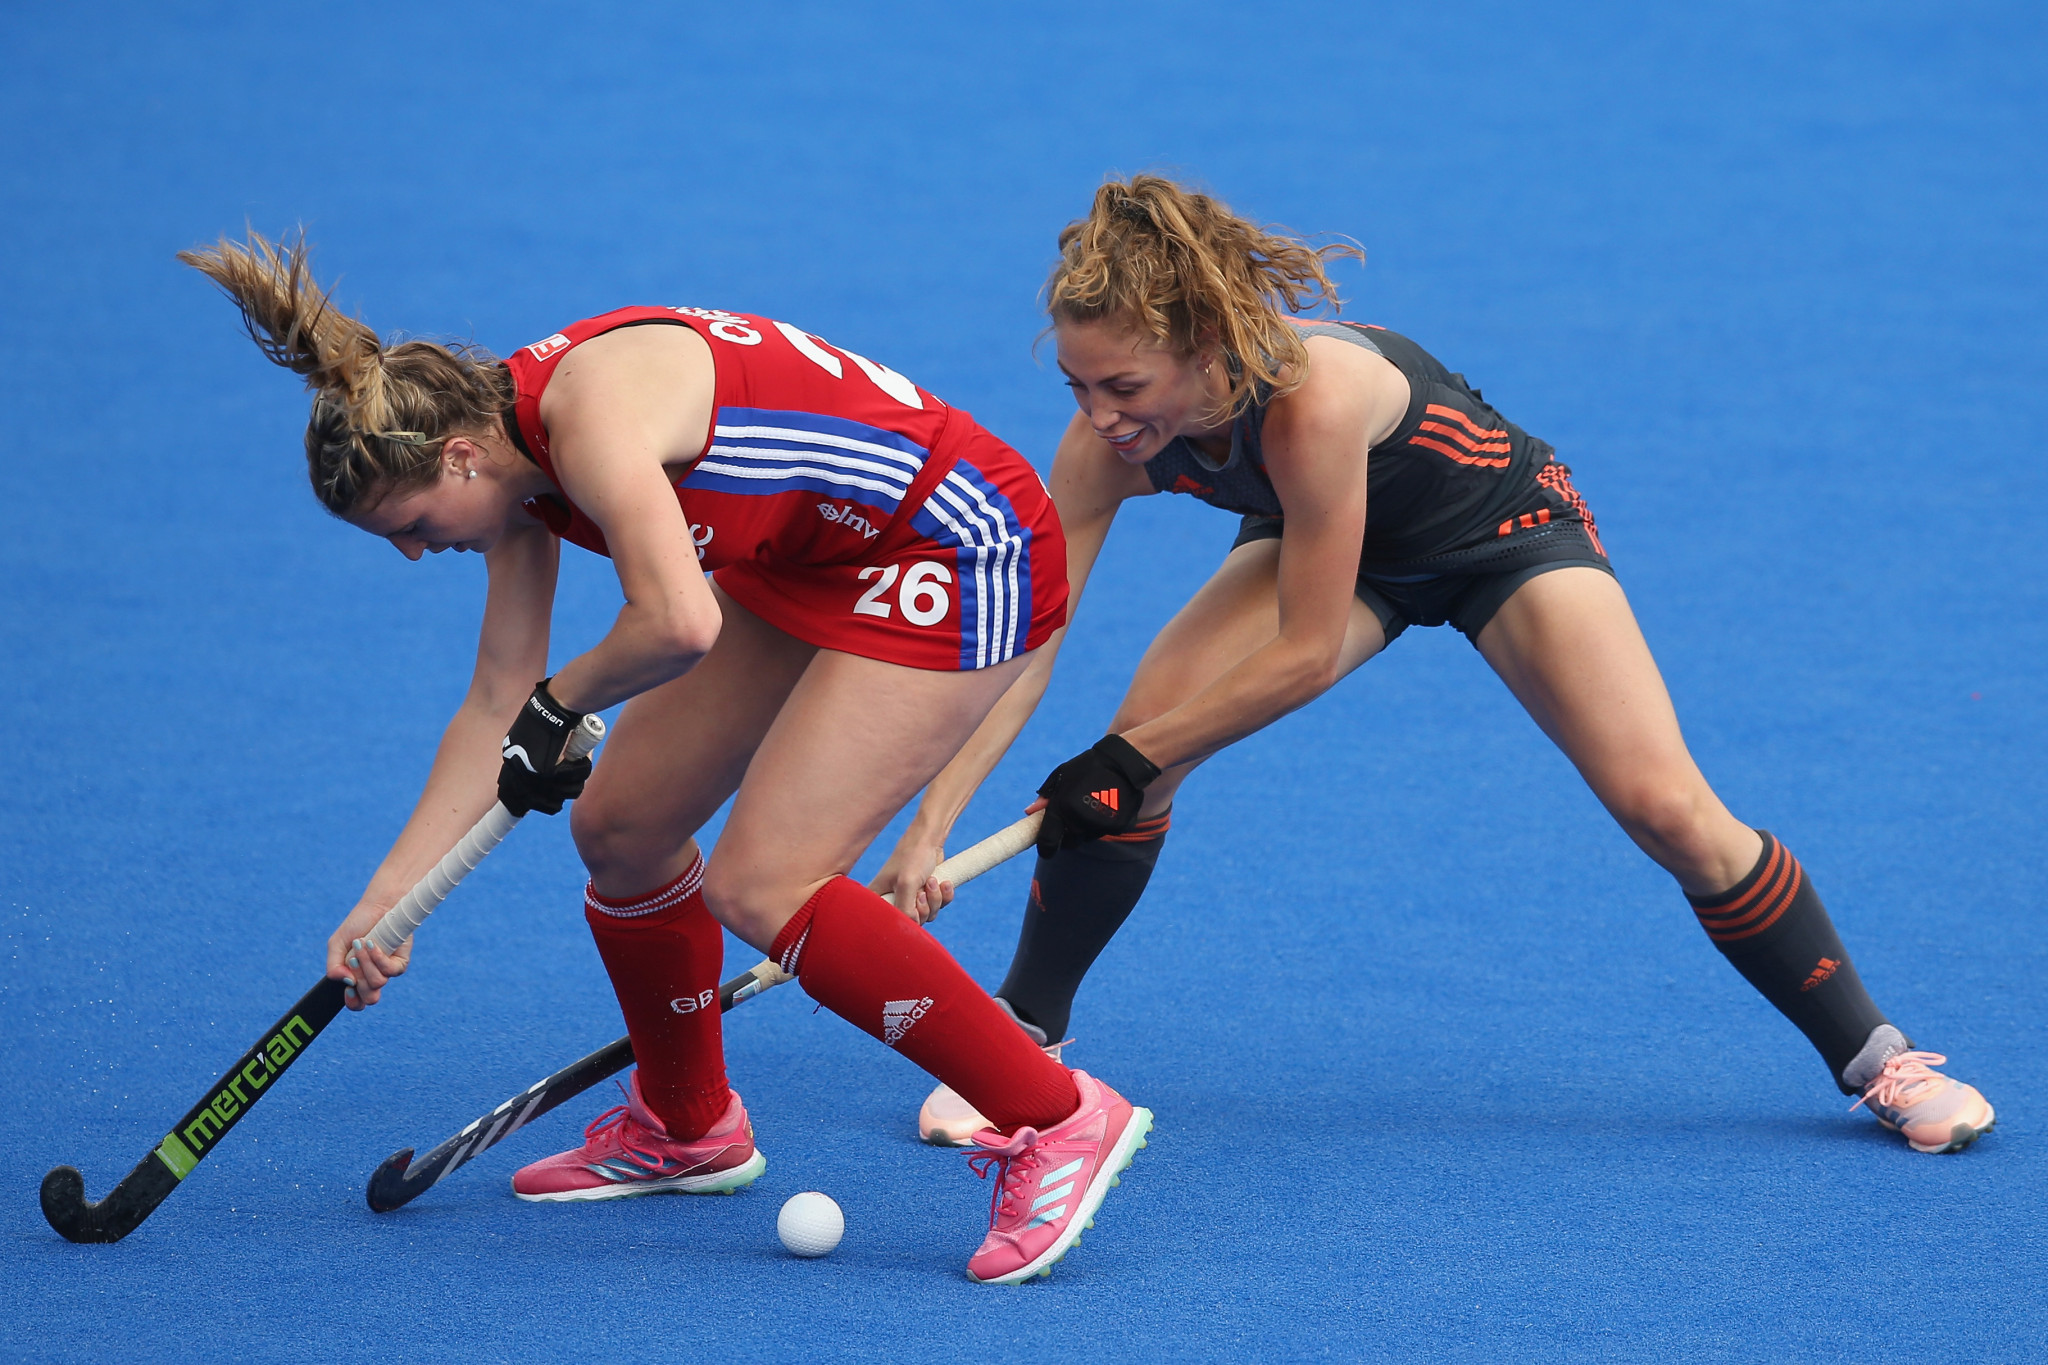 The European Hockey Federation has made gender equality a key goal ©Getty Images